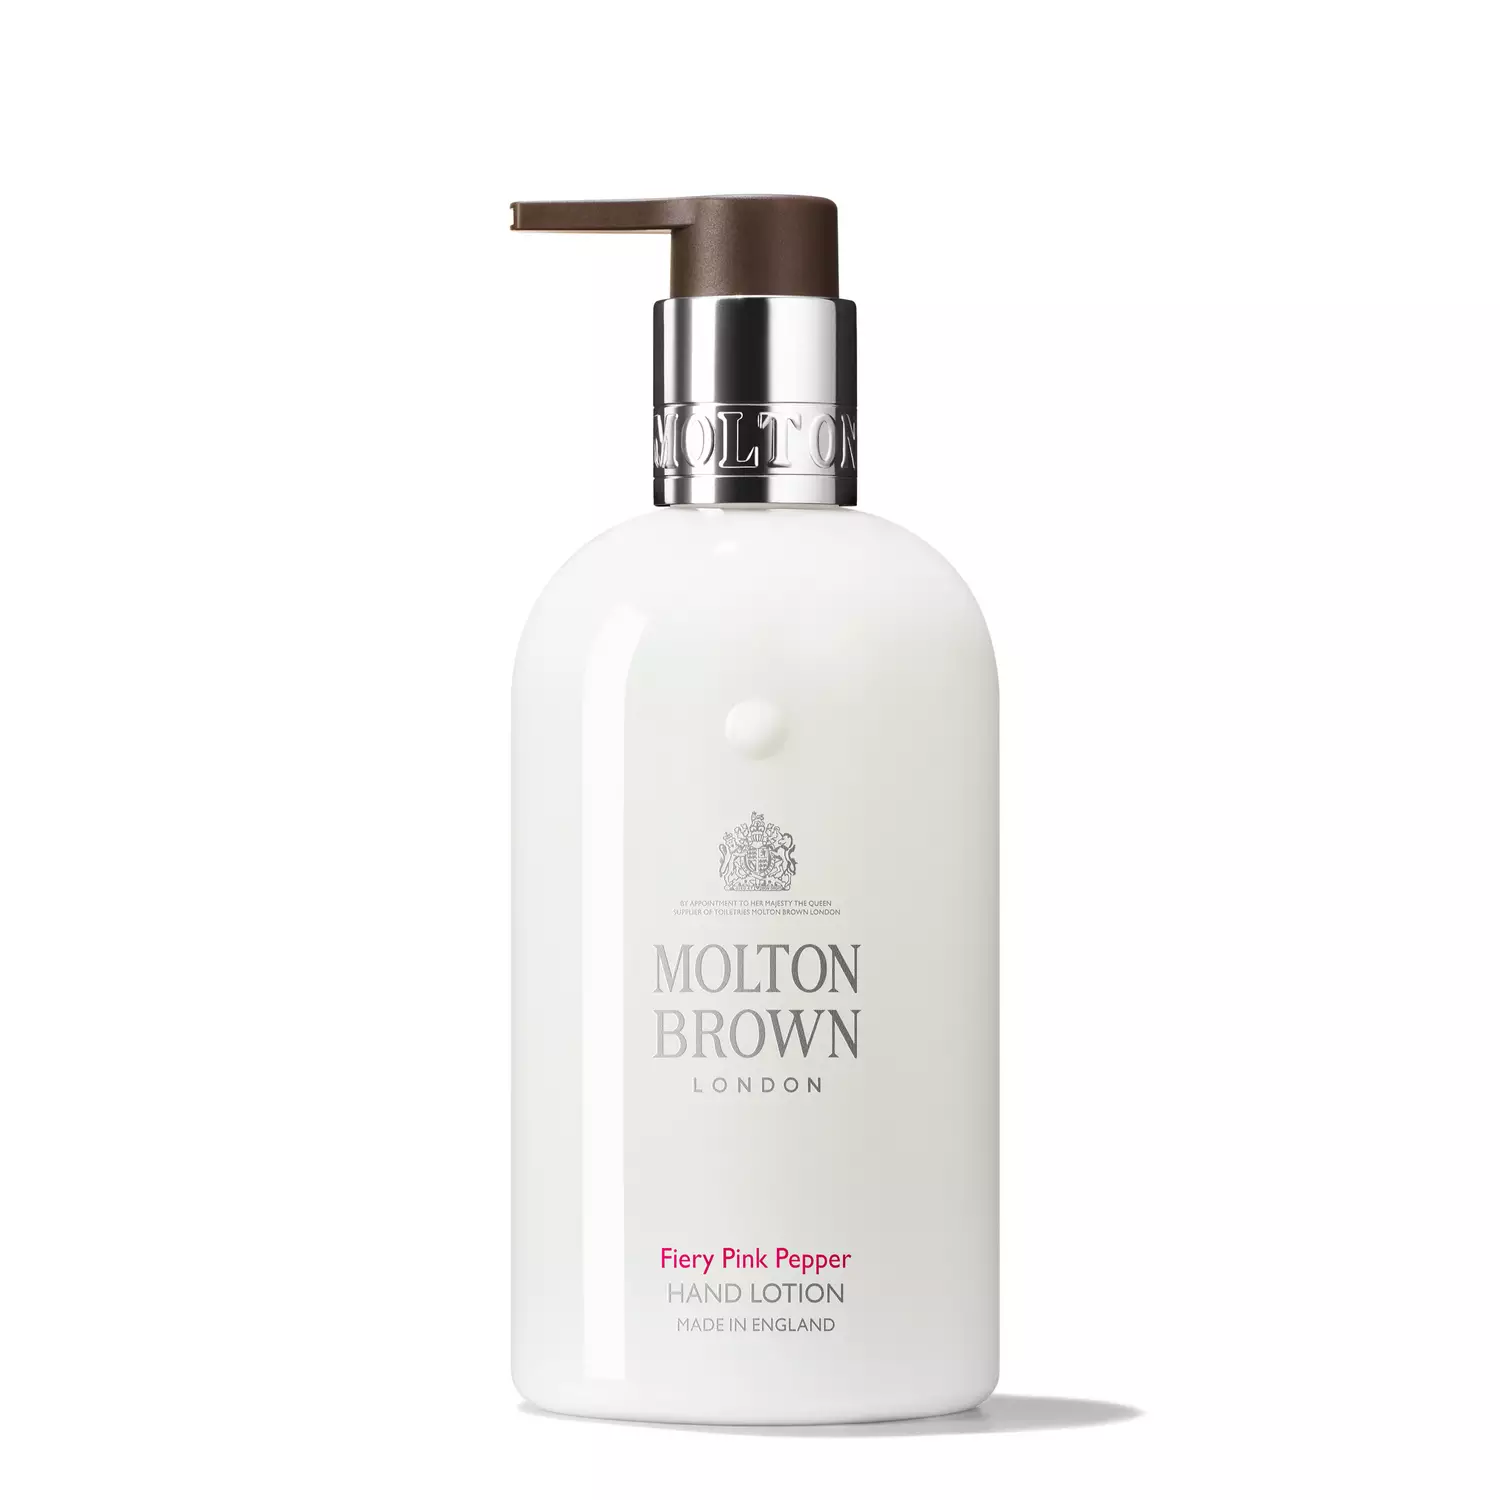 Molton Brown - Fiery Pink Pepper - Hand Lotion 